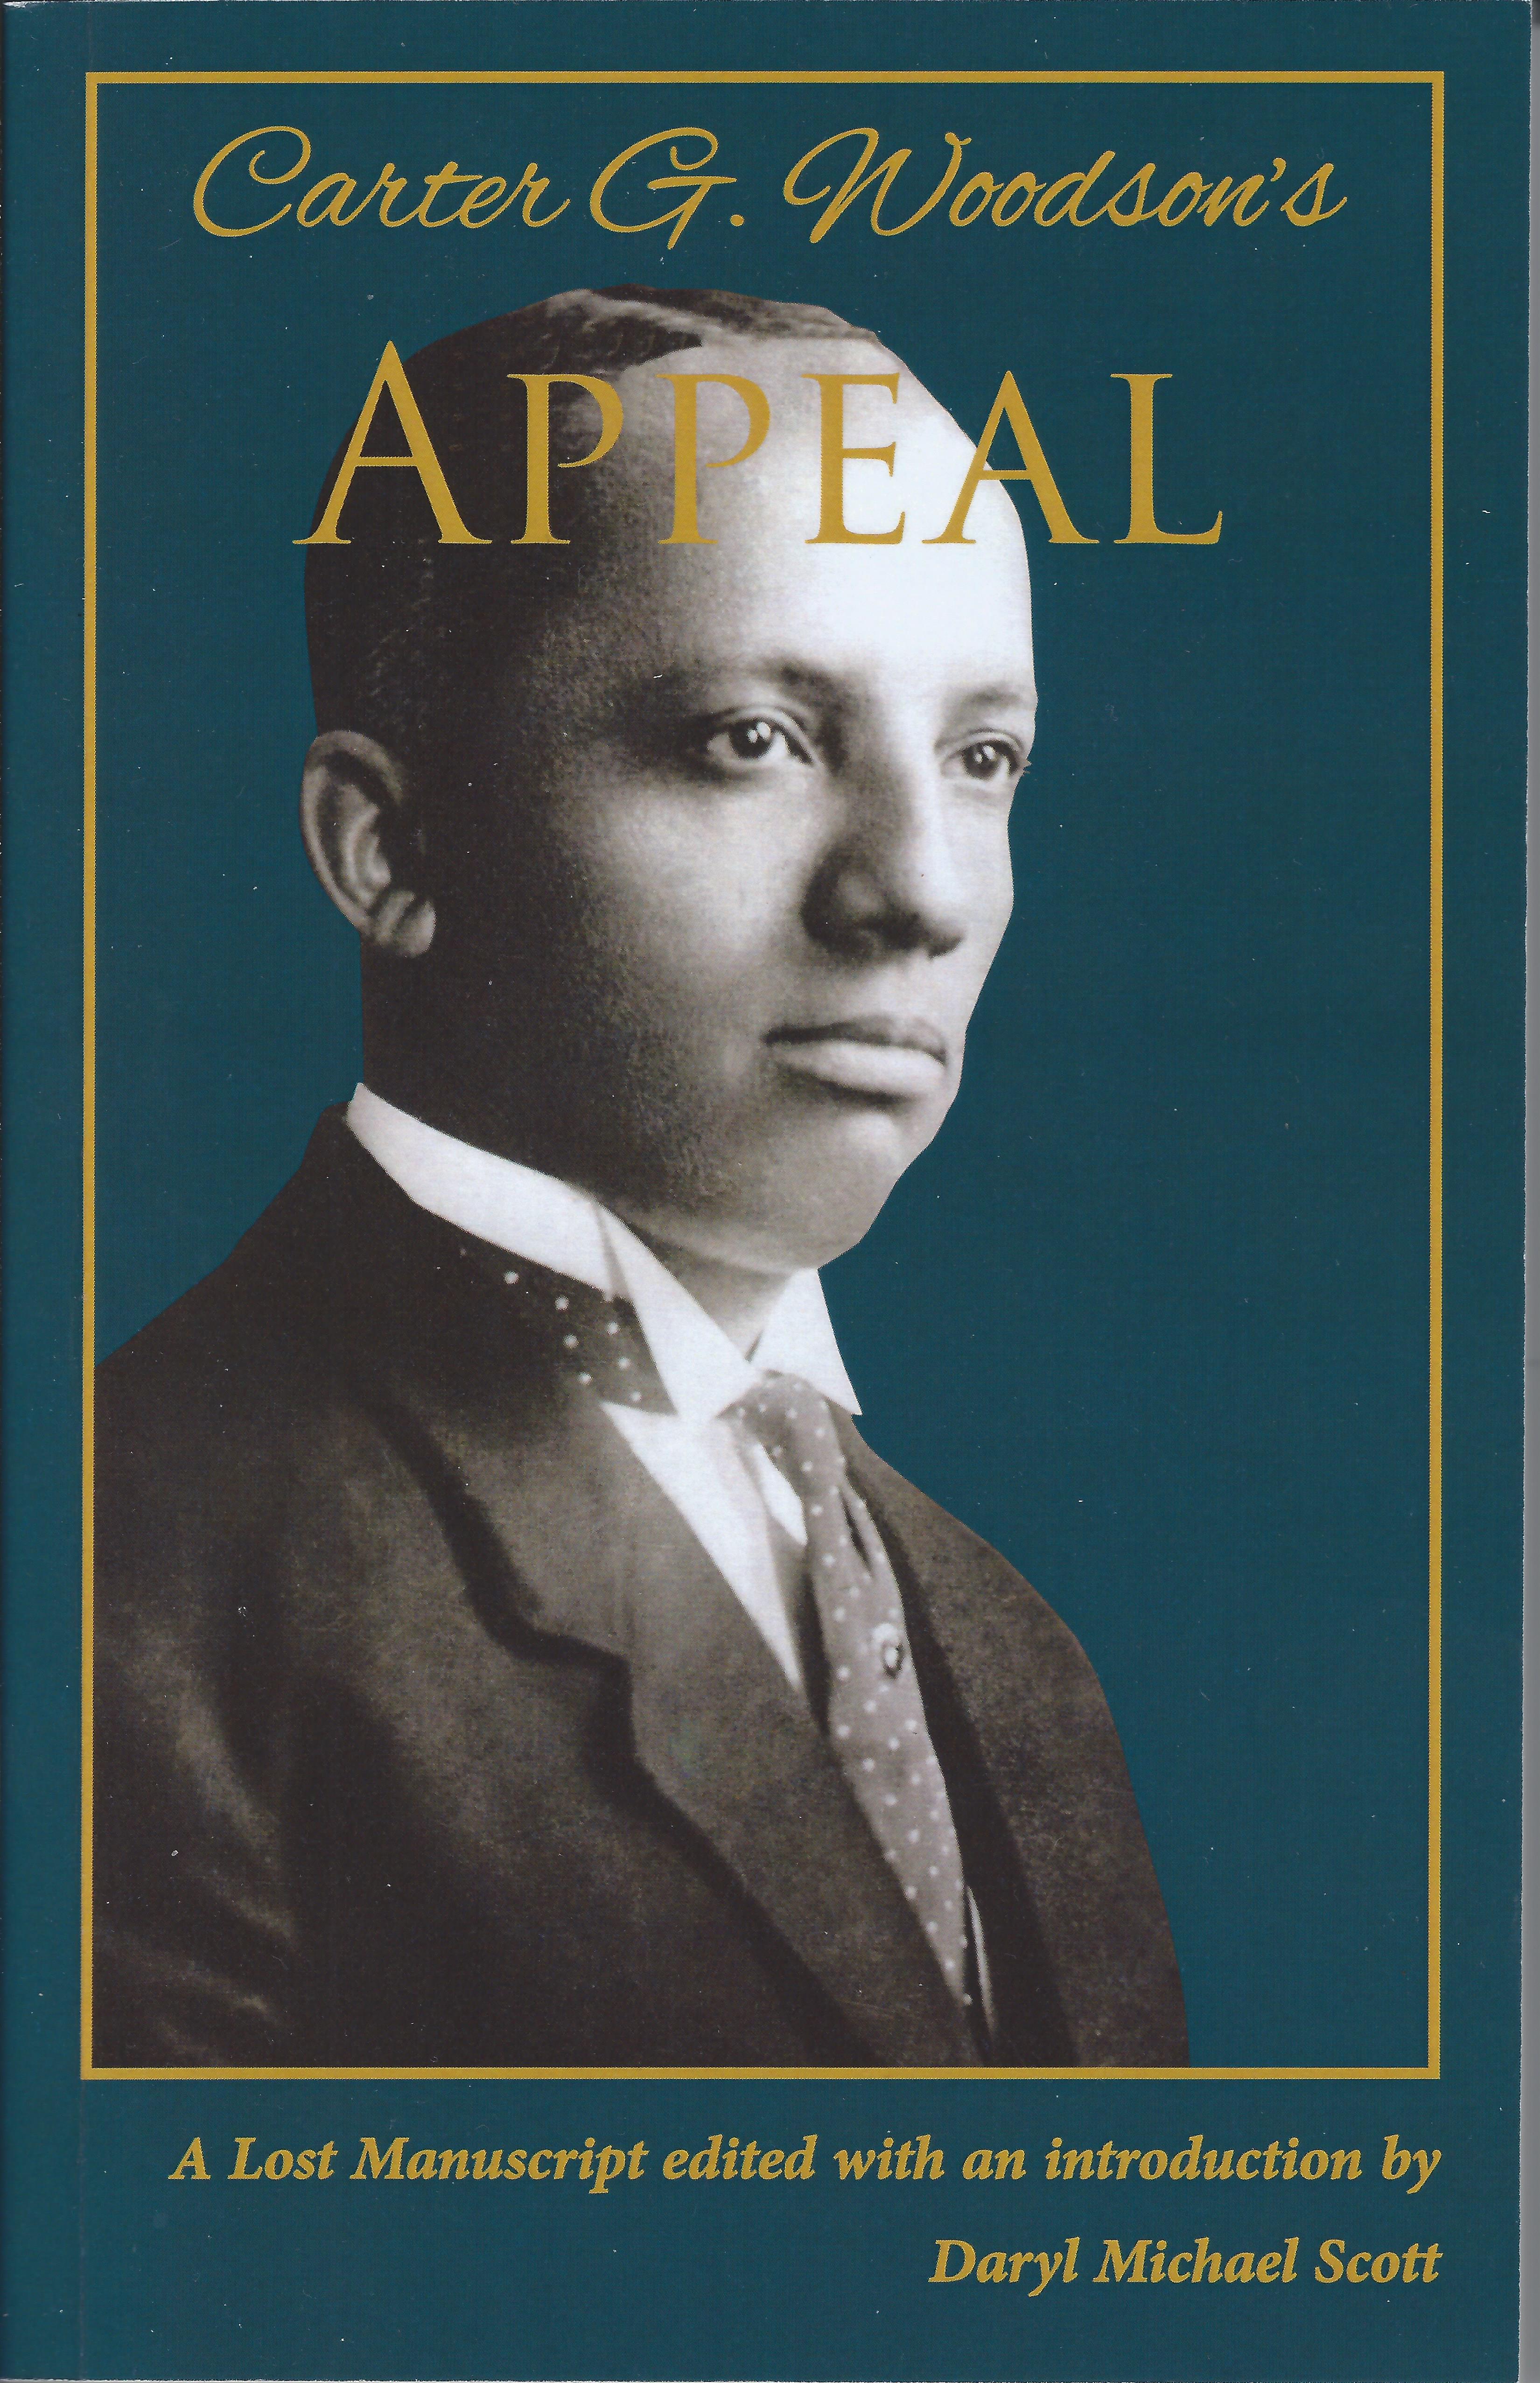 Carter G. Woodson's Appeal: A Lost Manucript (paperback) Green cover